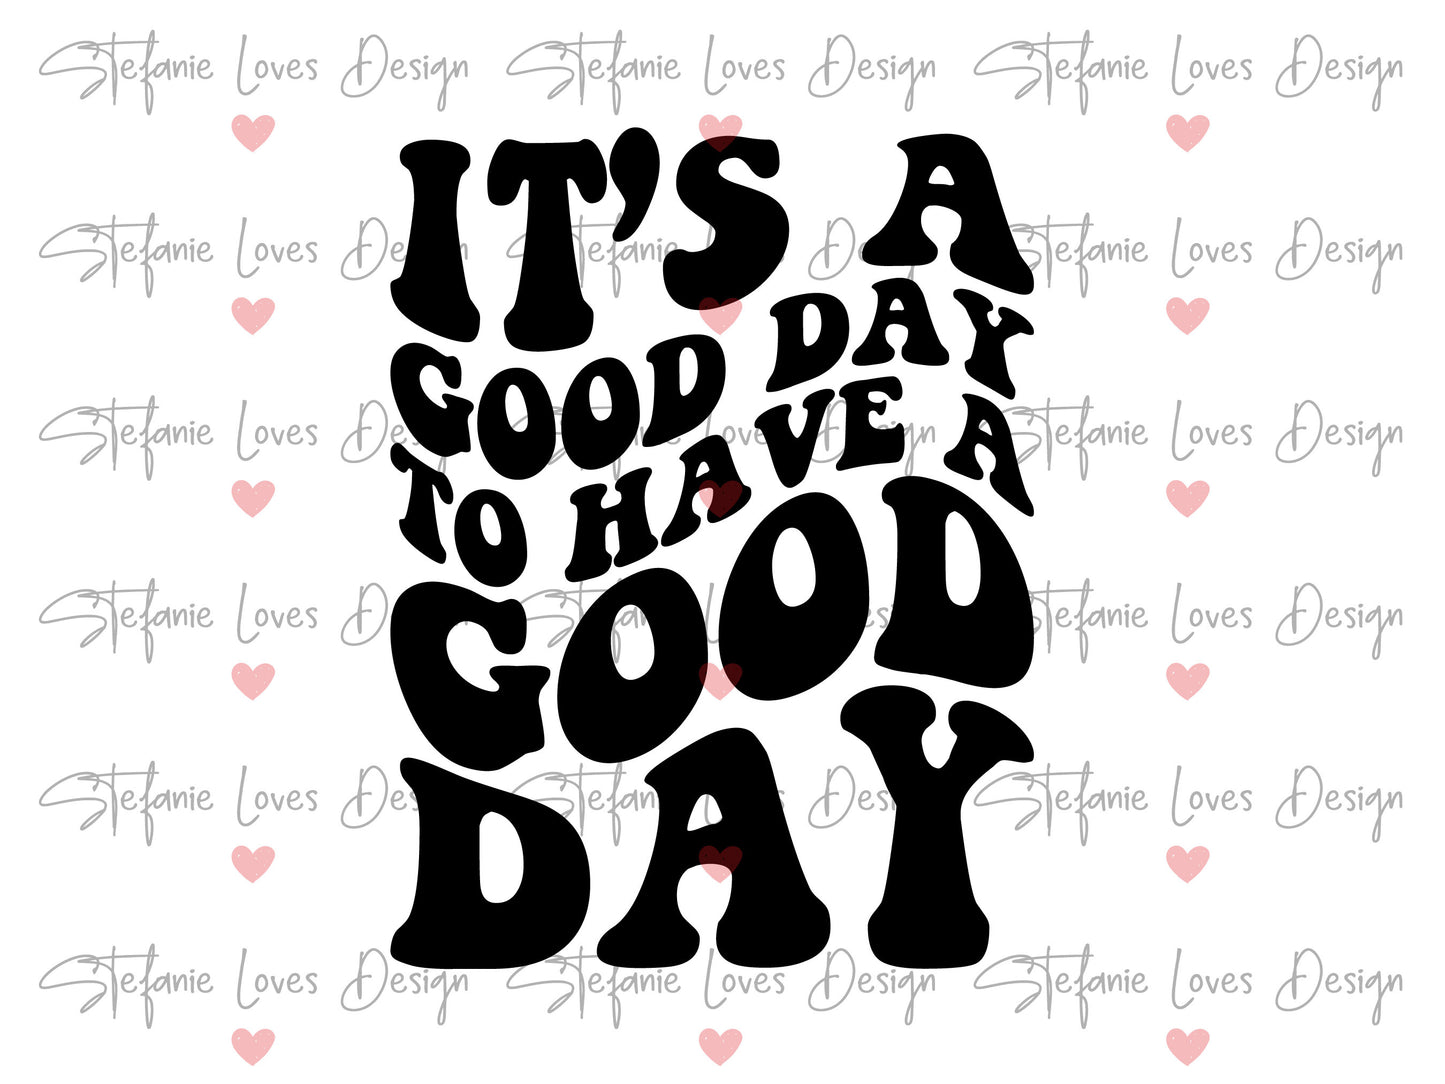 It's A Good Day To Have A Good Day svg, Good Day svg, Have a Good Day svg, Wavy Letters, Digital Design